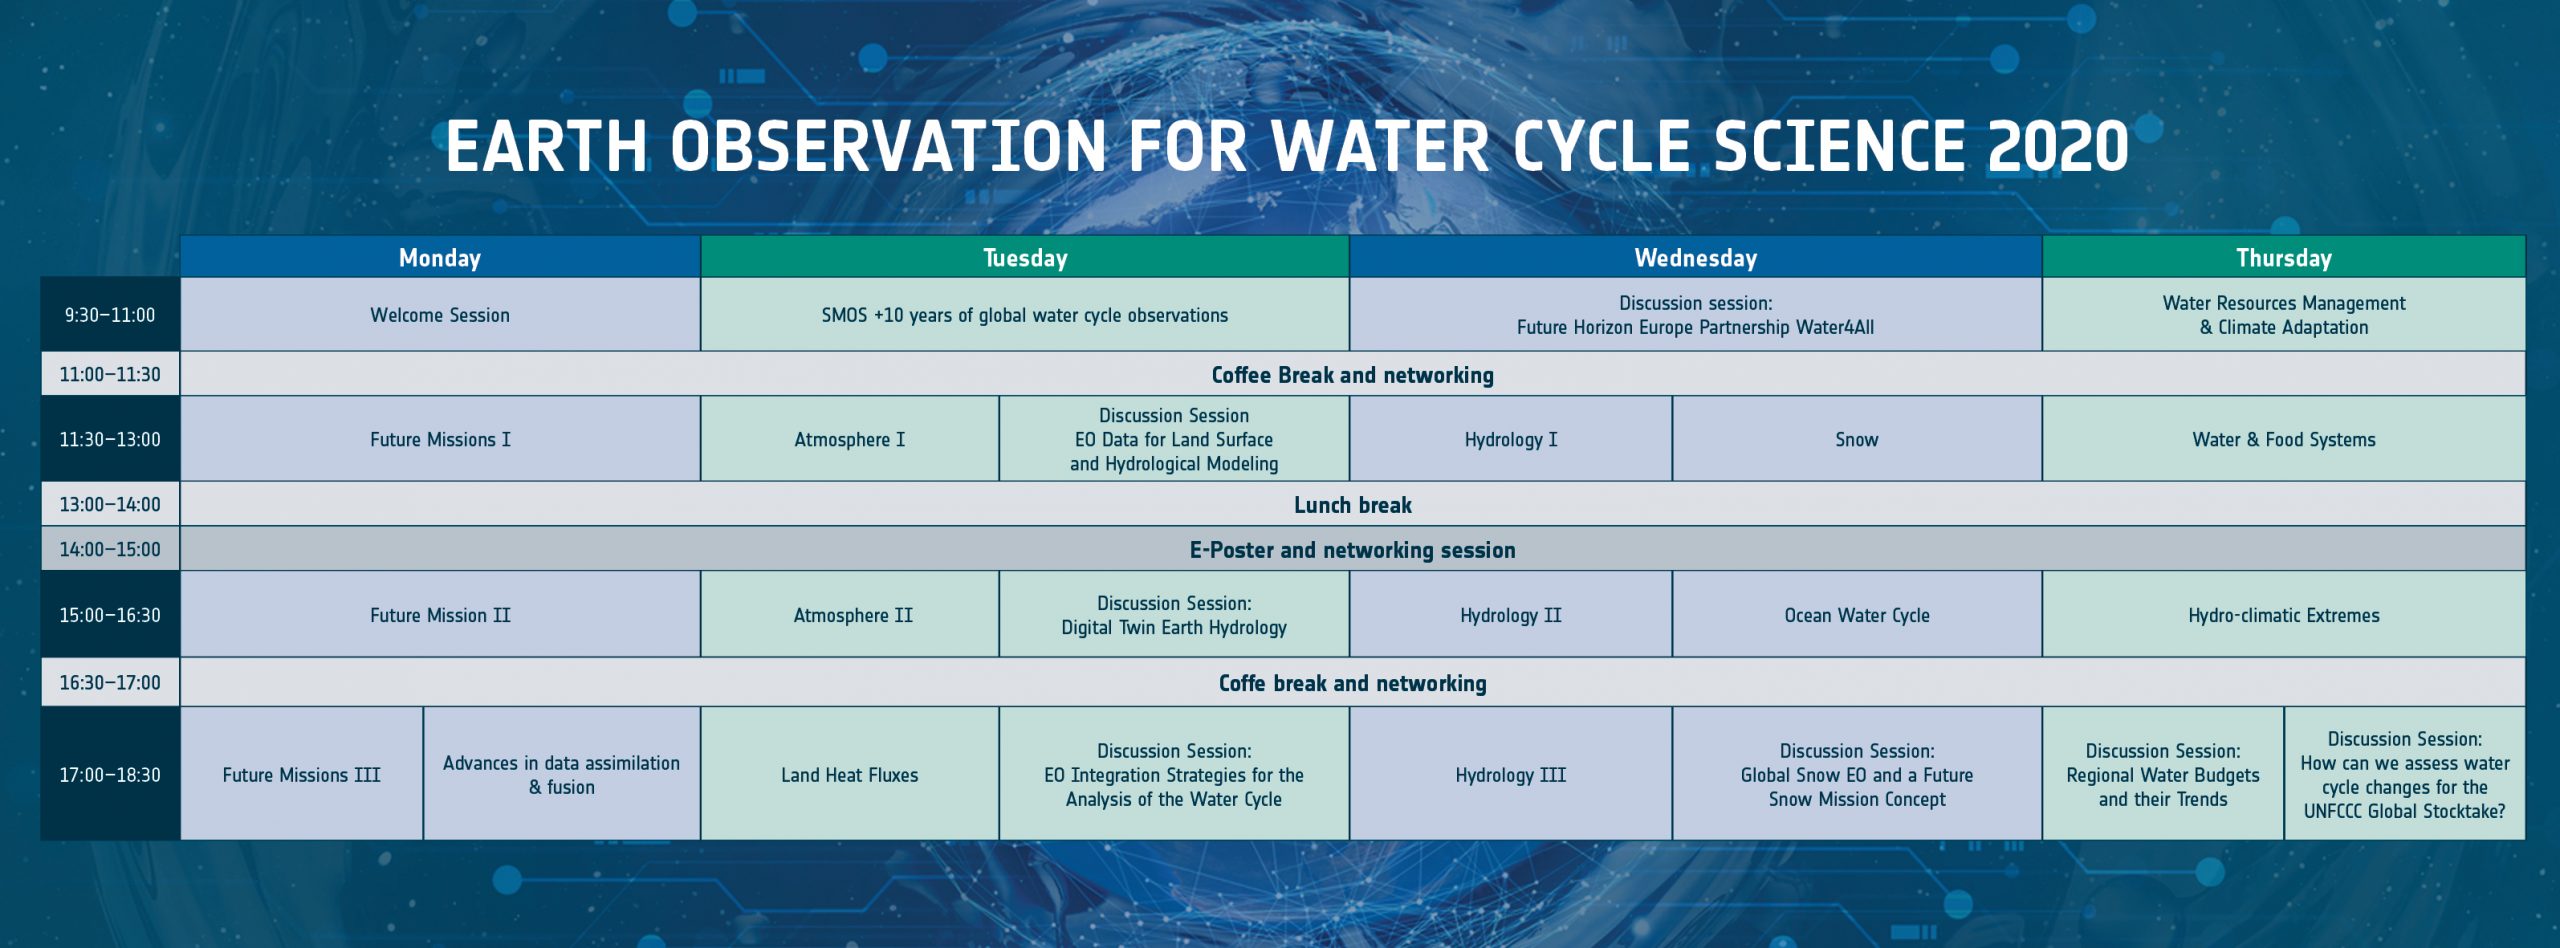 WCOM (Water Cycle Observation Mission) - eoPortal